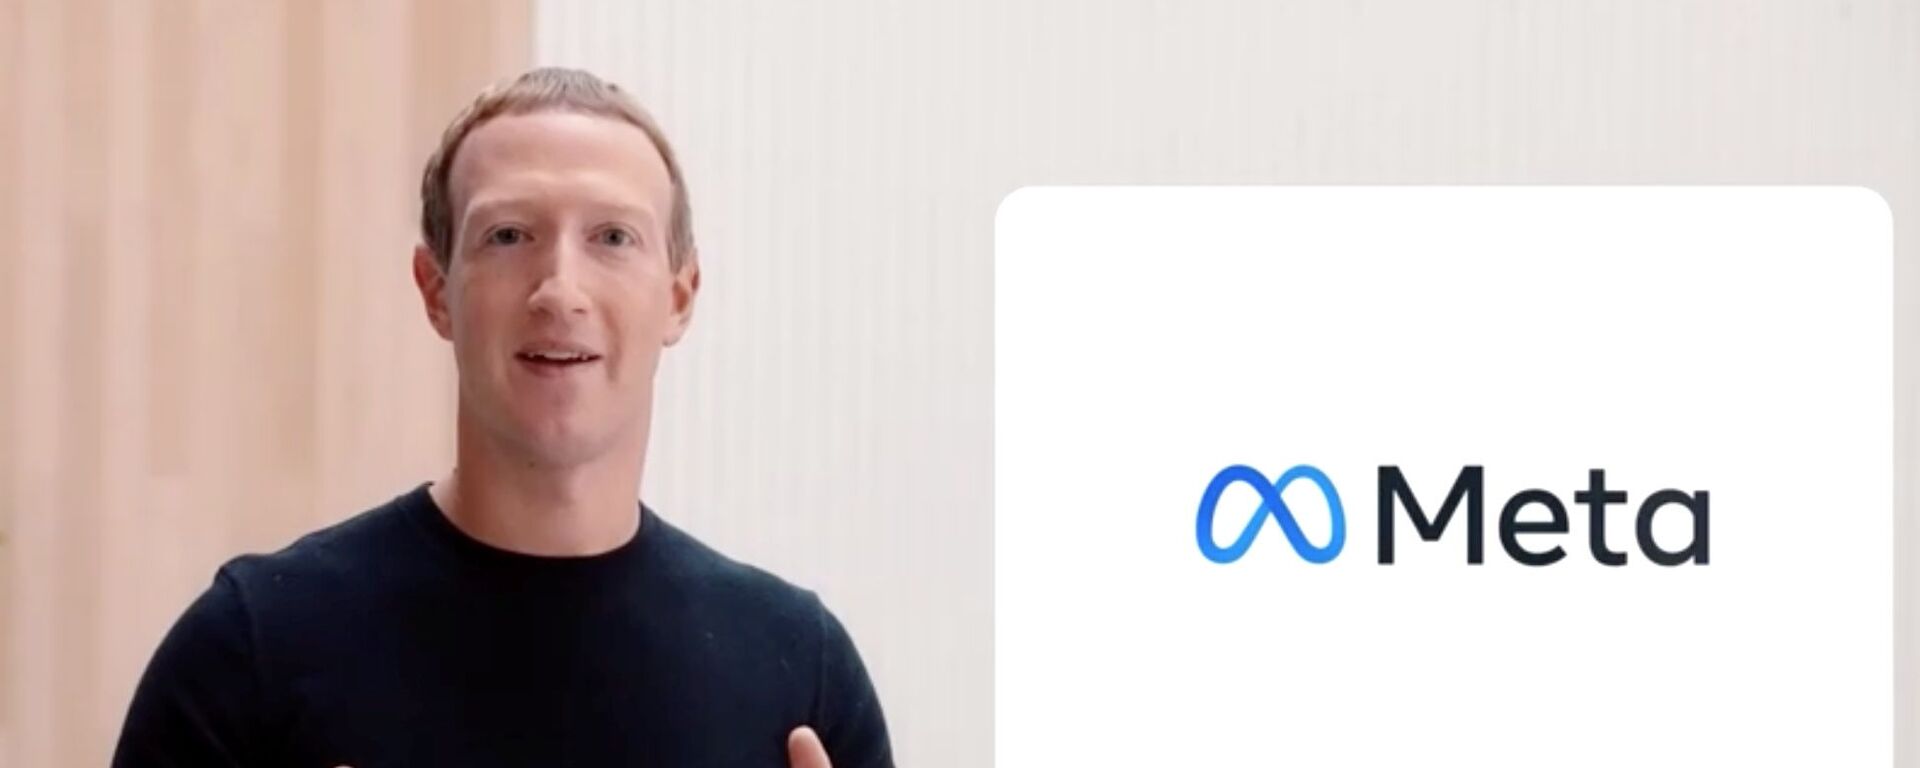 Facebook CEO Mark Zuckerberg speaks during a live-streamed virtual and augmented reality conference to announce the rebrand of Facebook as Meta, in this screen grab taken from a video released October 28, 2021.  - Sputnik International, 1920, 29.10.2021